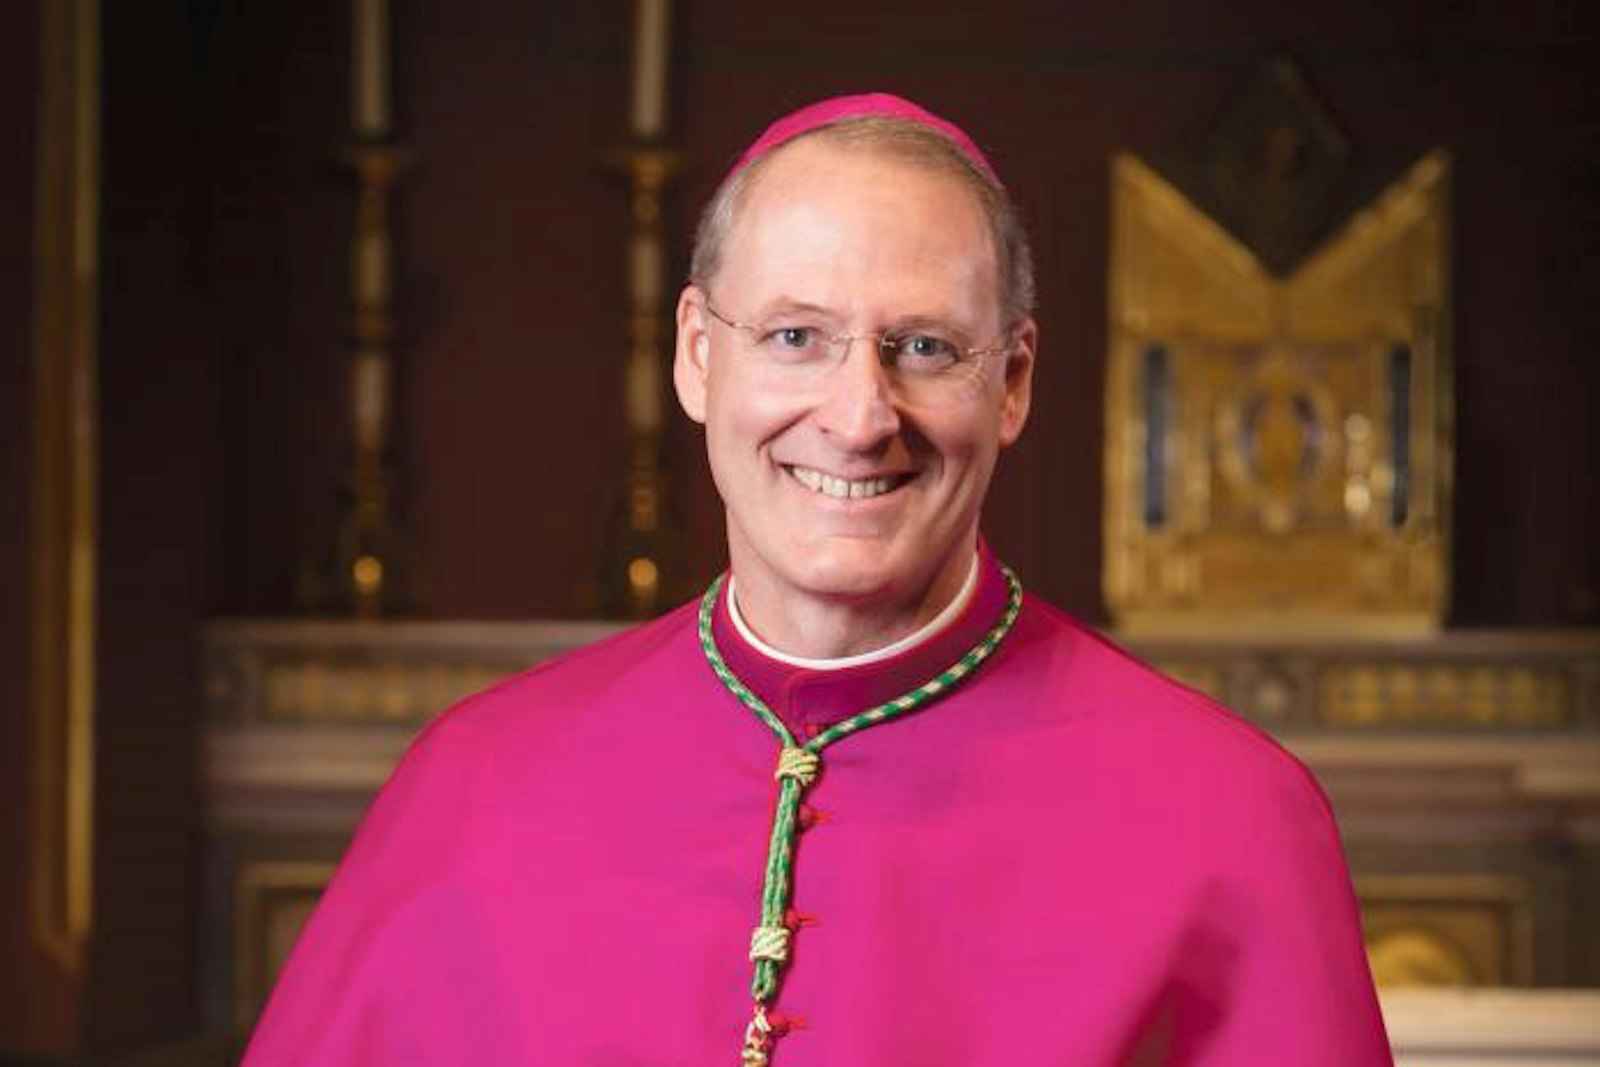 Because Archbishop Russell was granted the title "archbishop" when he was appointed an apostolic nuncio by Pope Francis in 2016, he will retain that title while serving as an auxiliary bishop to current Detroit Archbishop Allen H. Vigneron. (Photo courtesy of Archbishop Paul F. Russell)